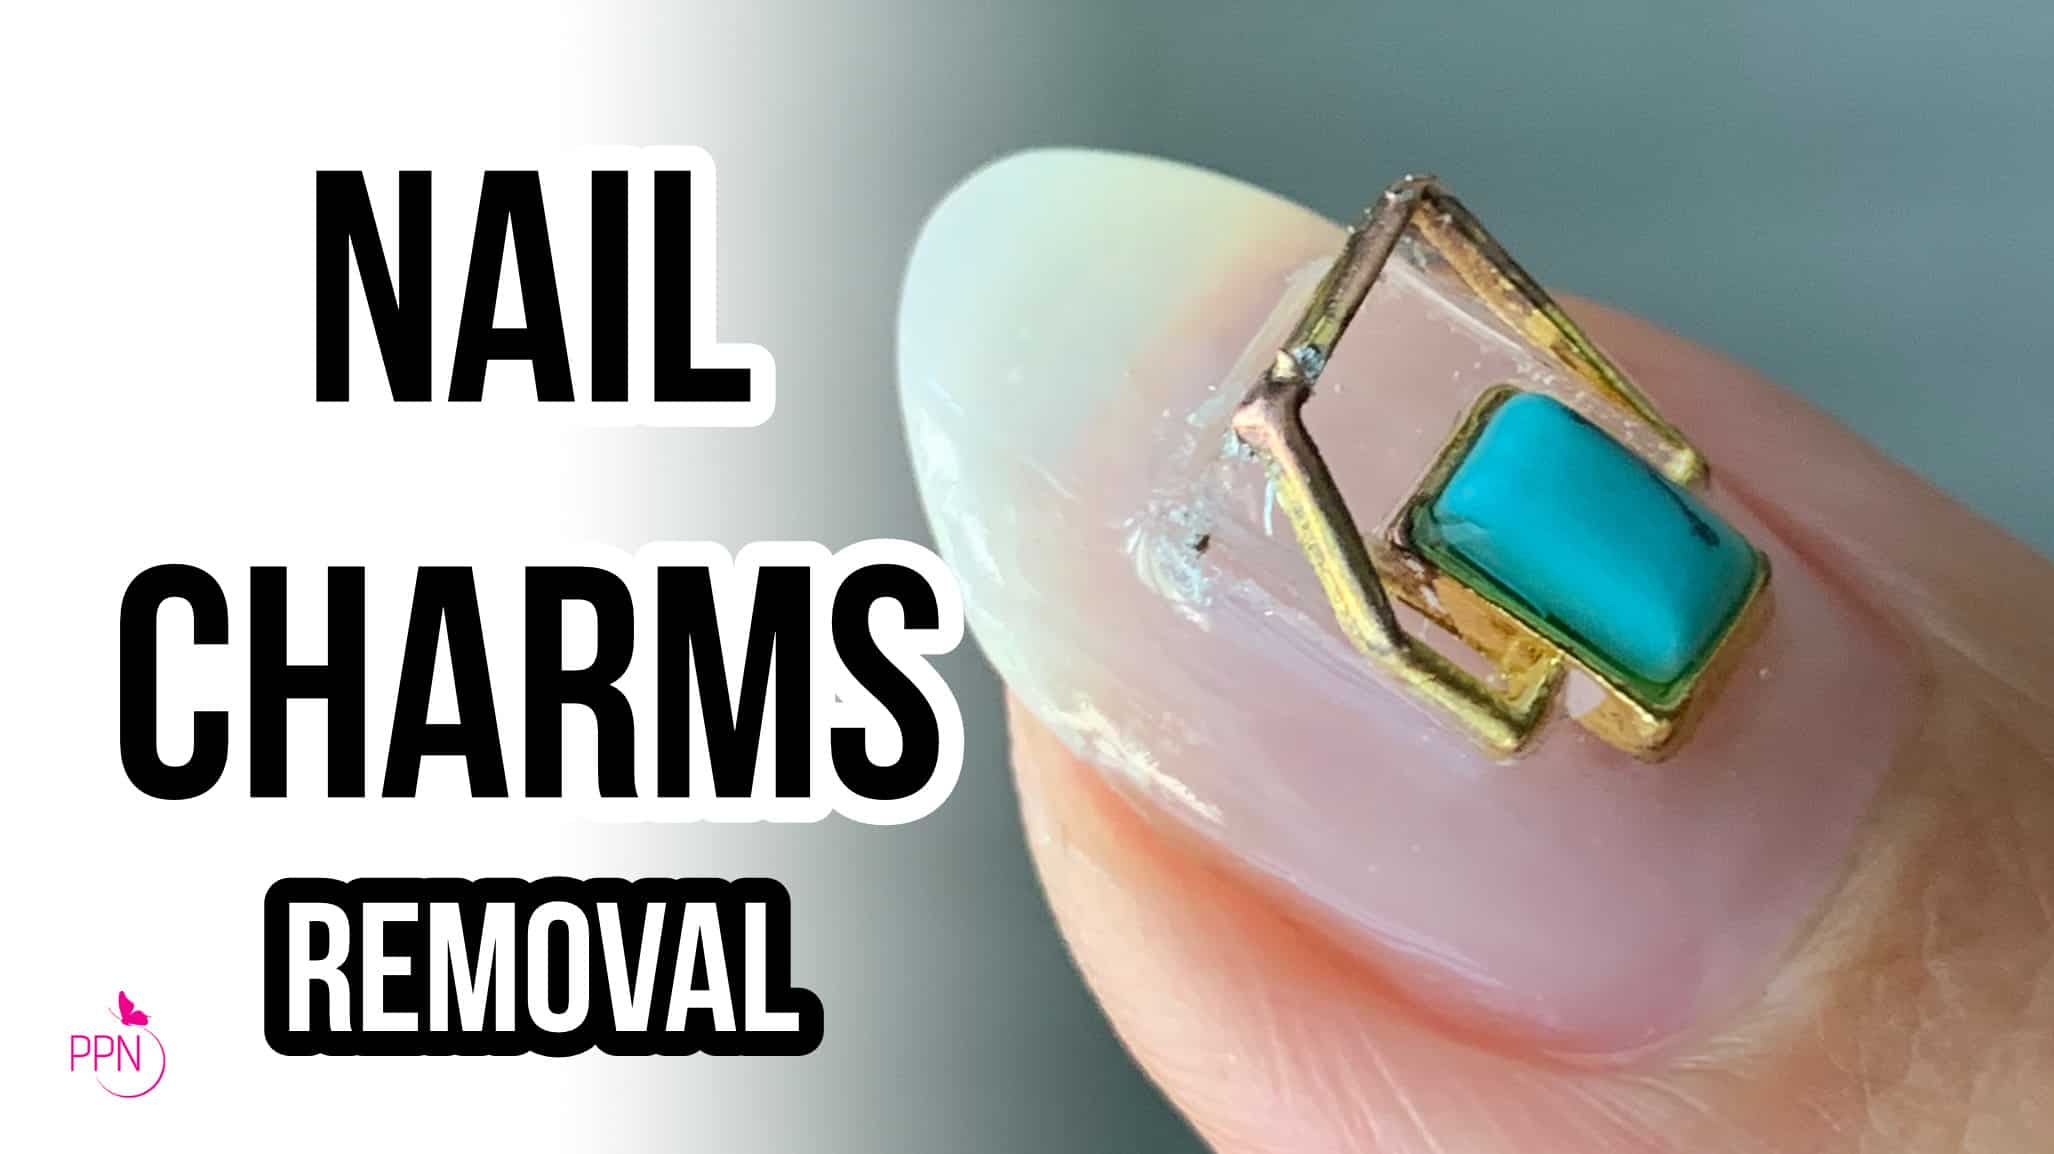 How to Safely Remove 3D Nail Charms  2 Mistakes to Avoid! - Paola Ponce  Nails